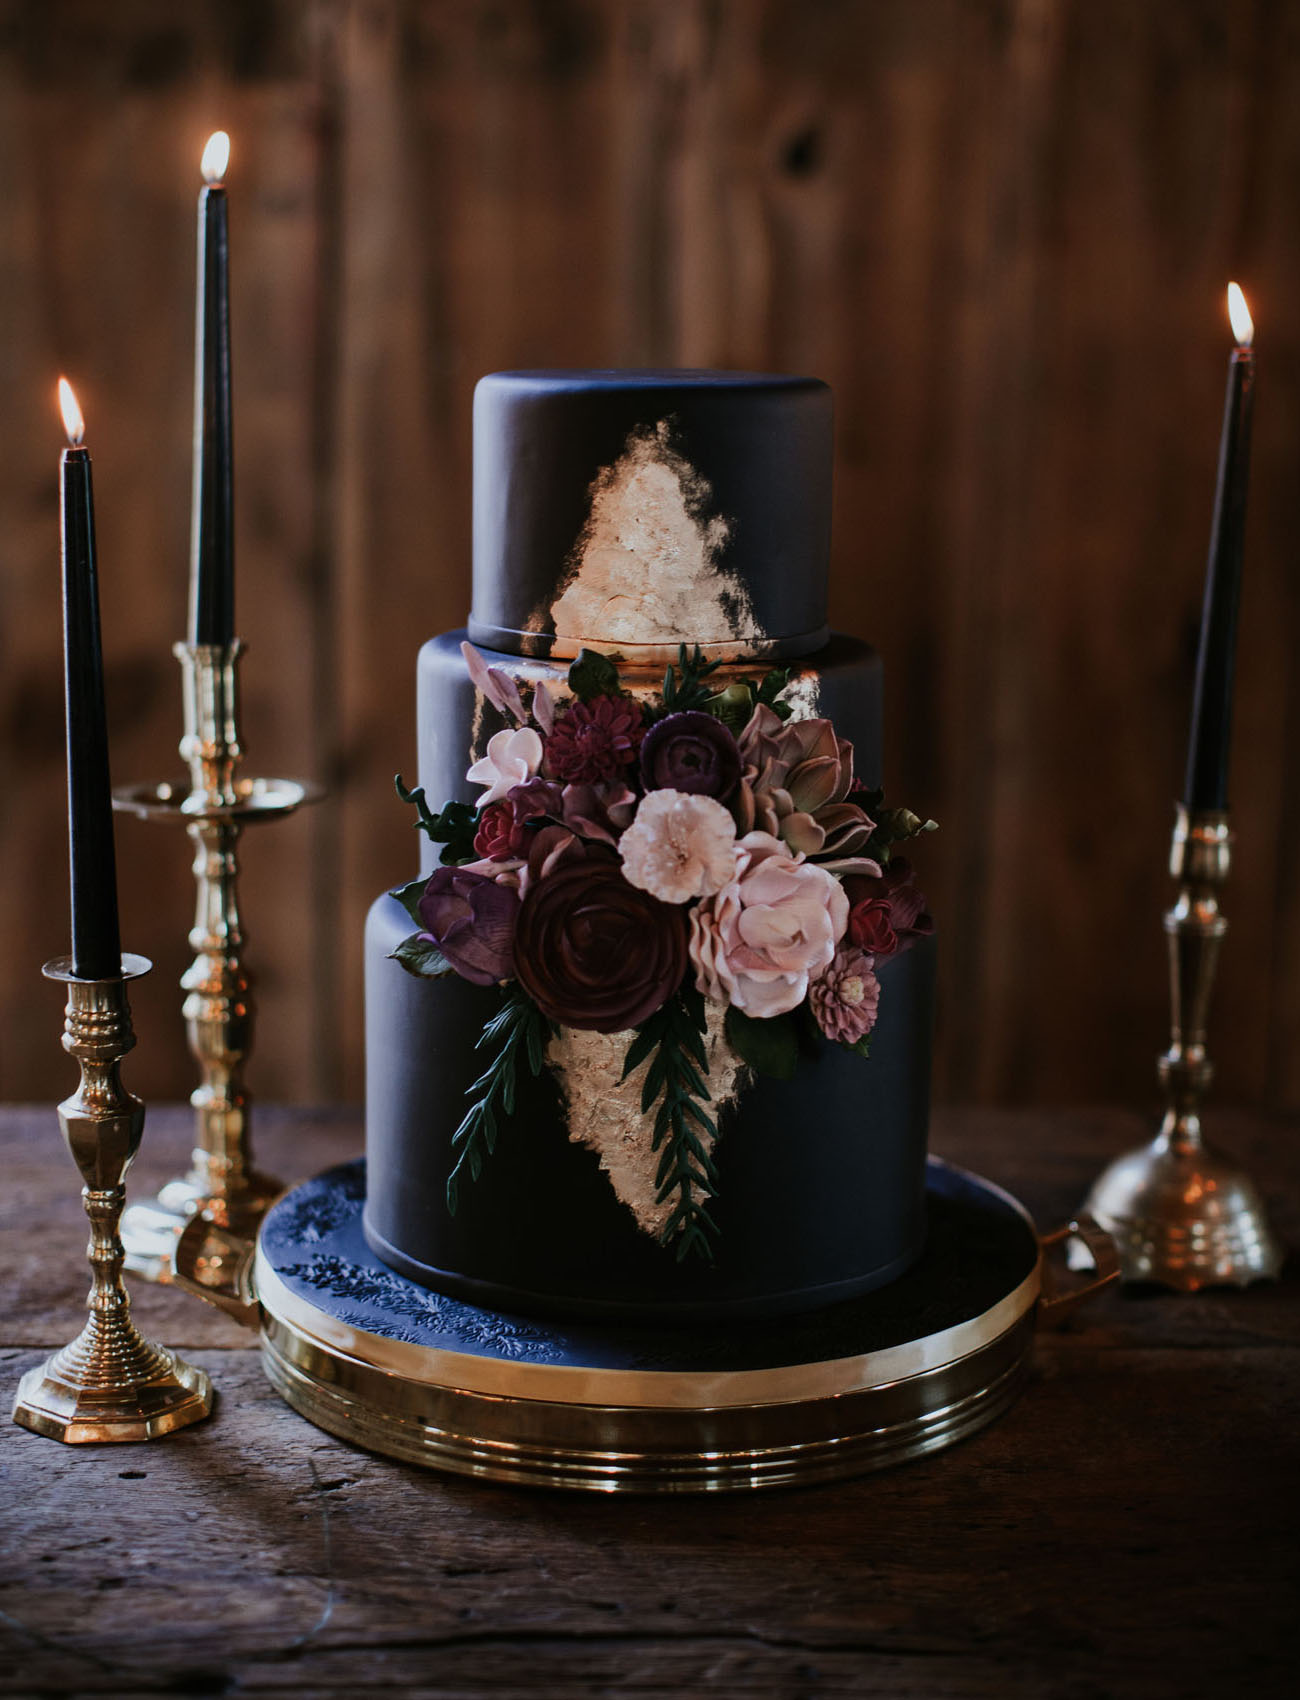 The wedding cake was a black one, with gold leaf and sugar flowers